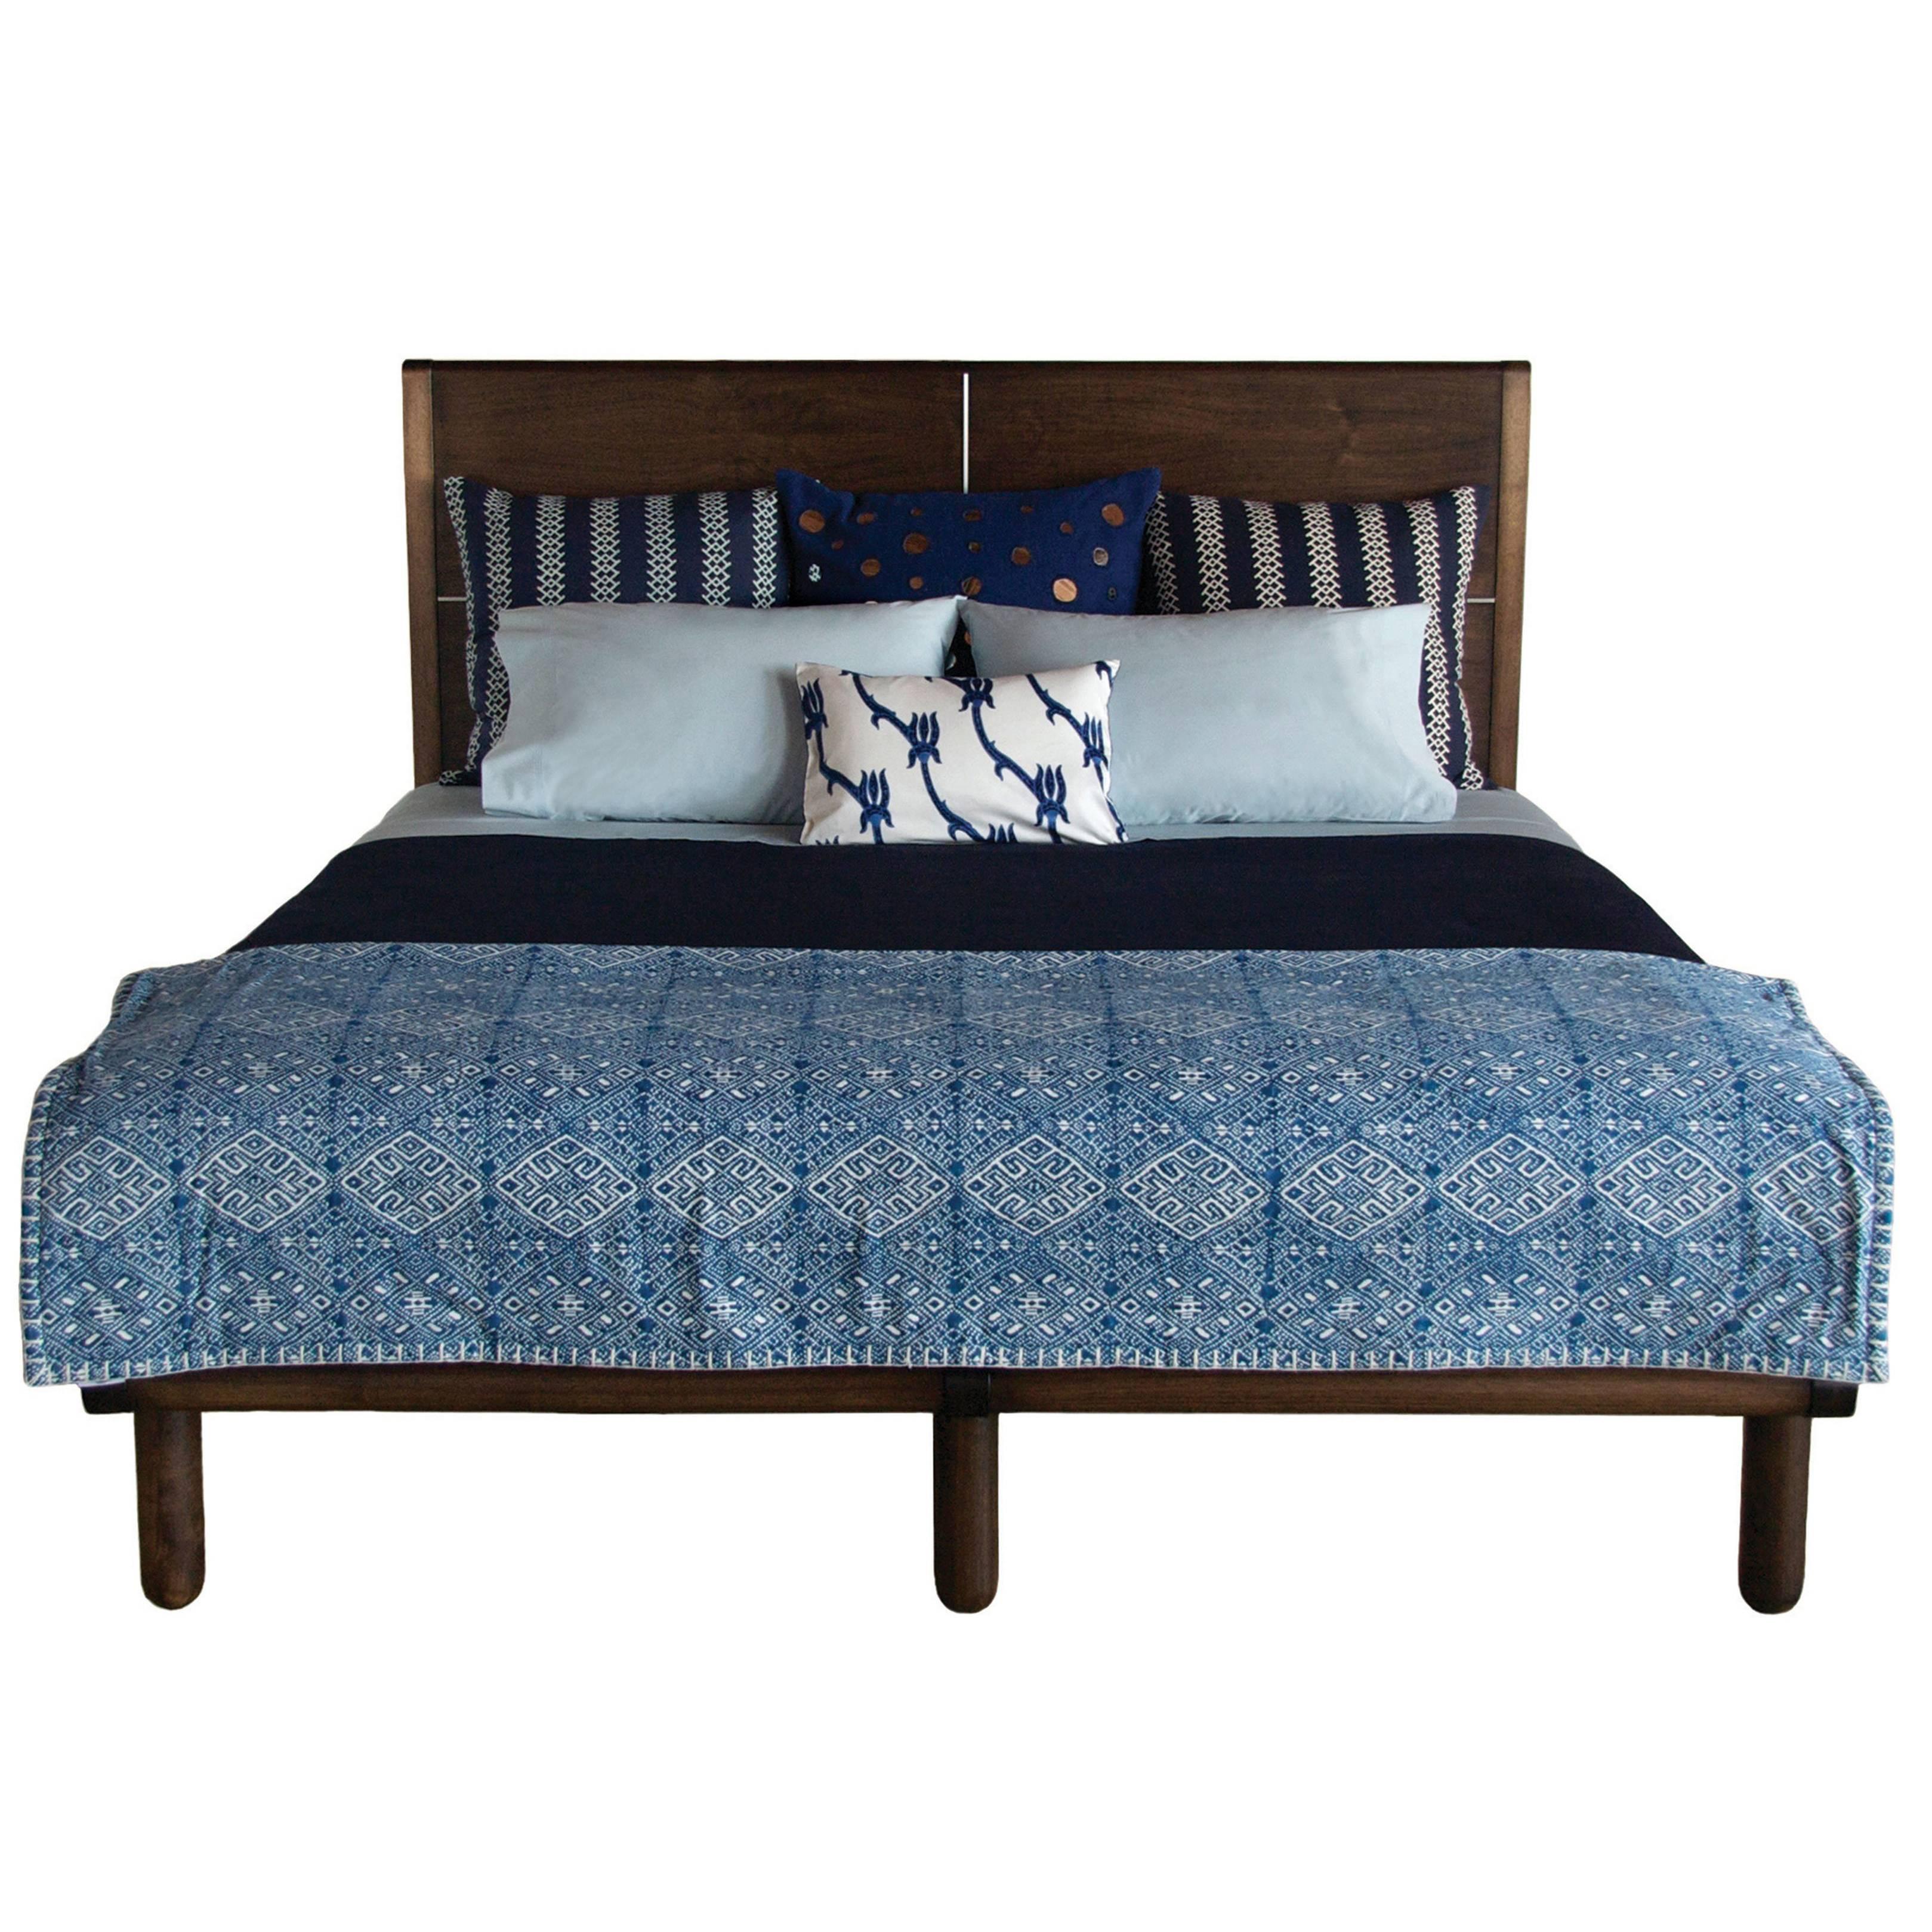 Isaksen Bed in Walnut with Headboard - handcrafted by Richard Wrightman Design